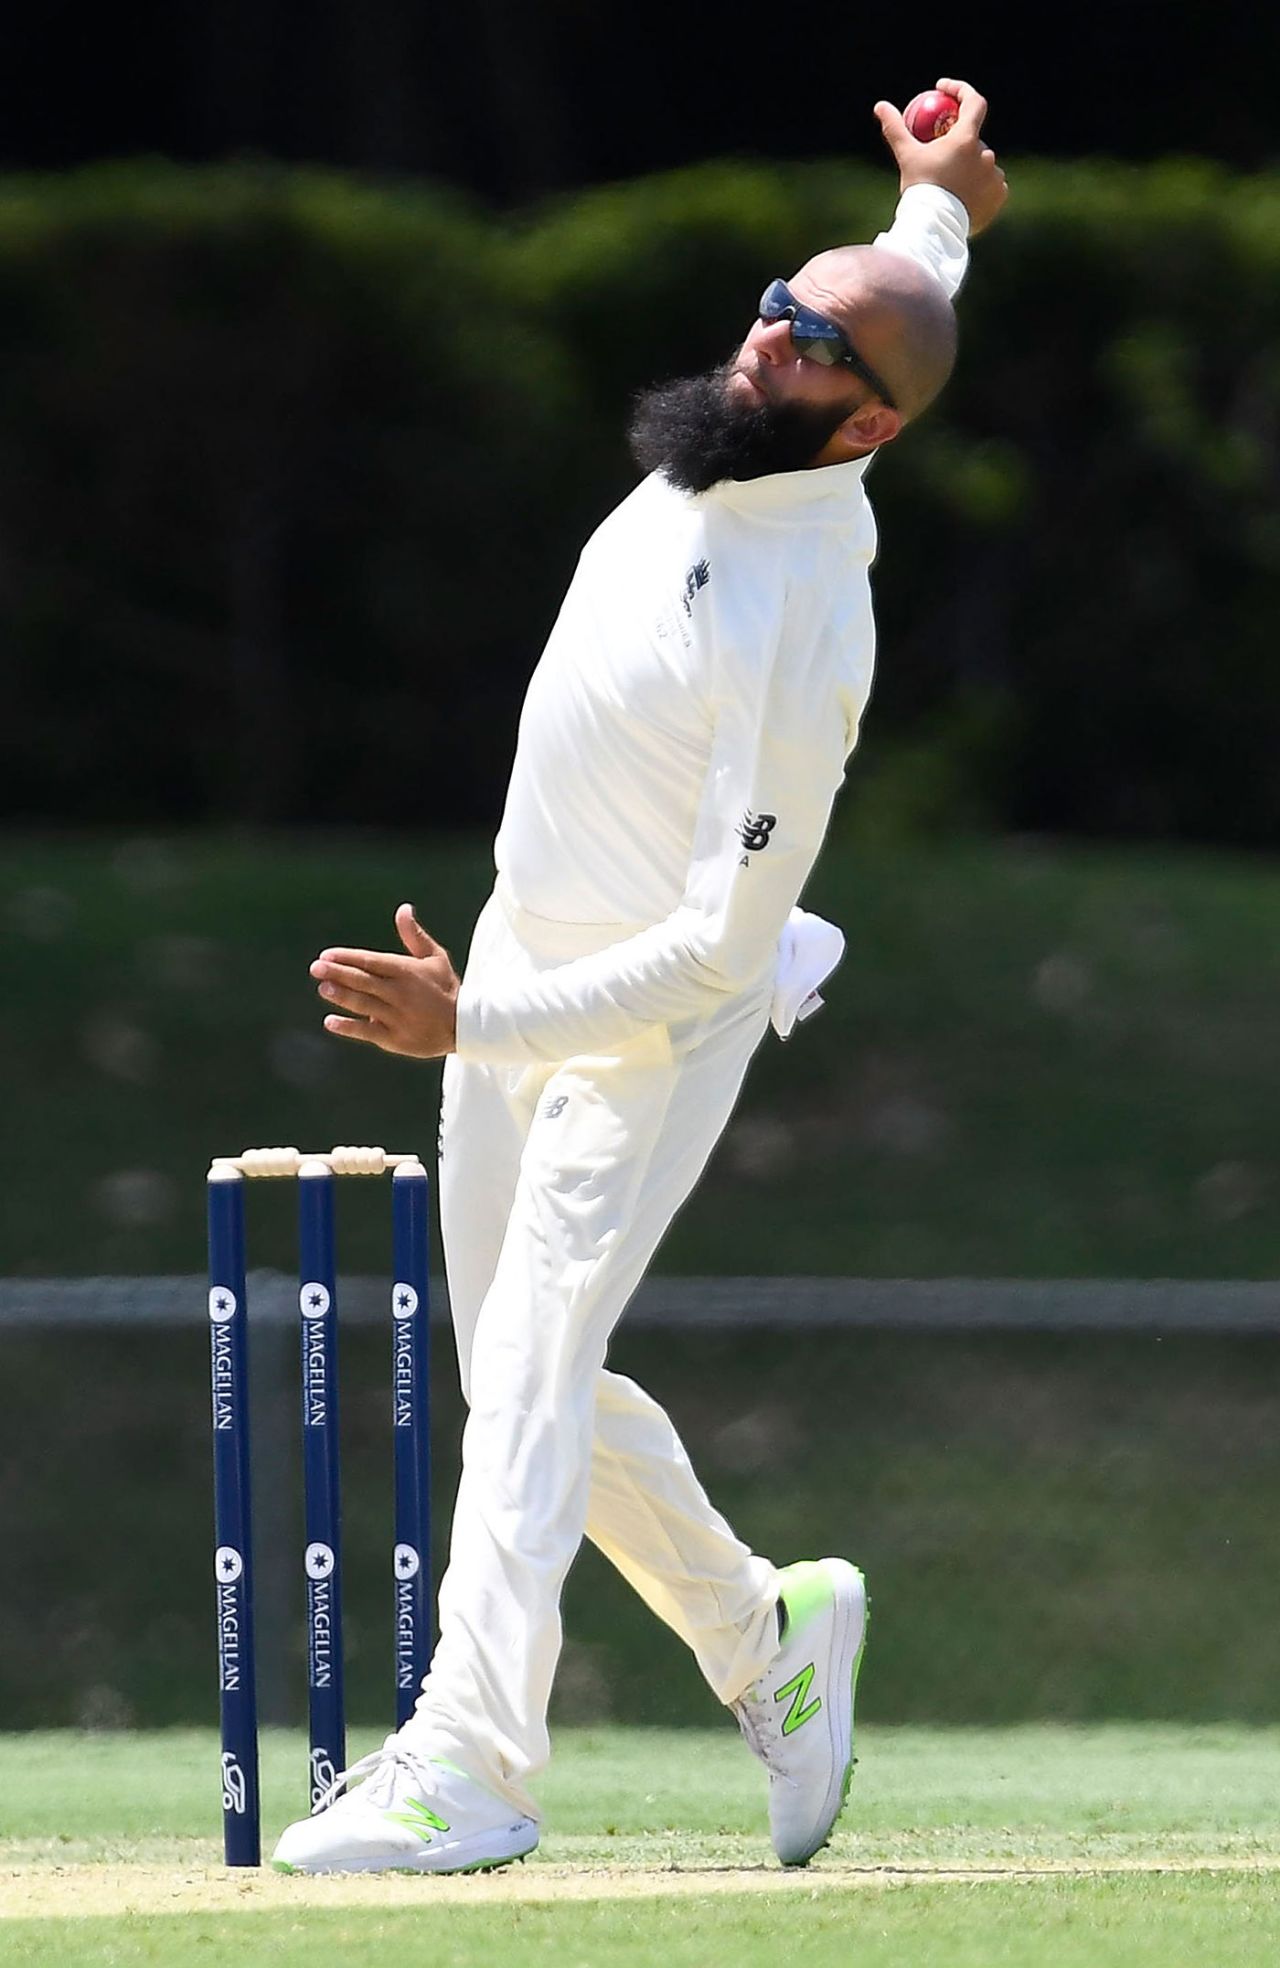 Moeen Ali was back in action, Cricket Australia XI v England, The Ashes 2017-18, tour match, 1st day, Townsville, November 15, 2017